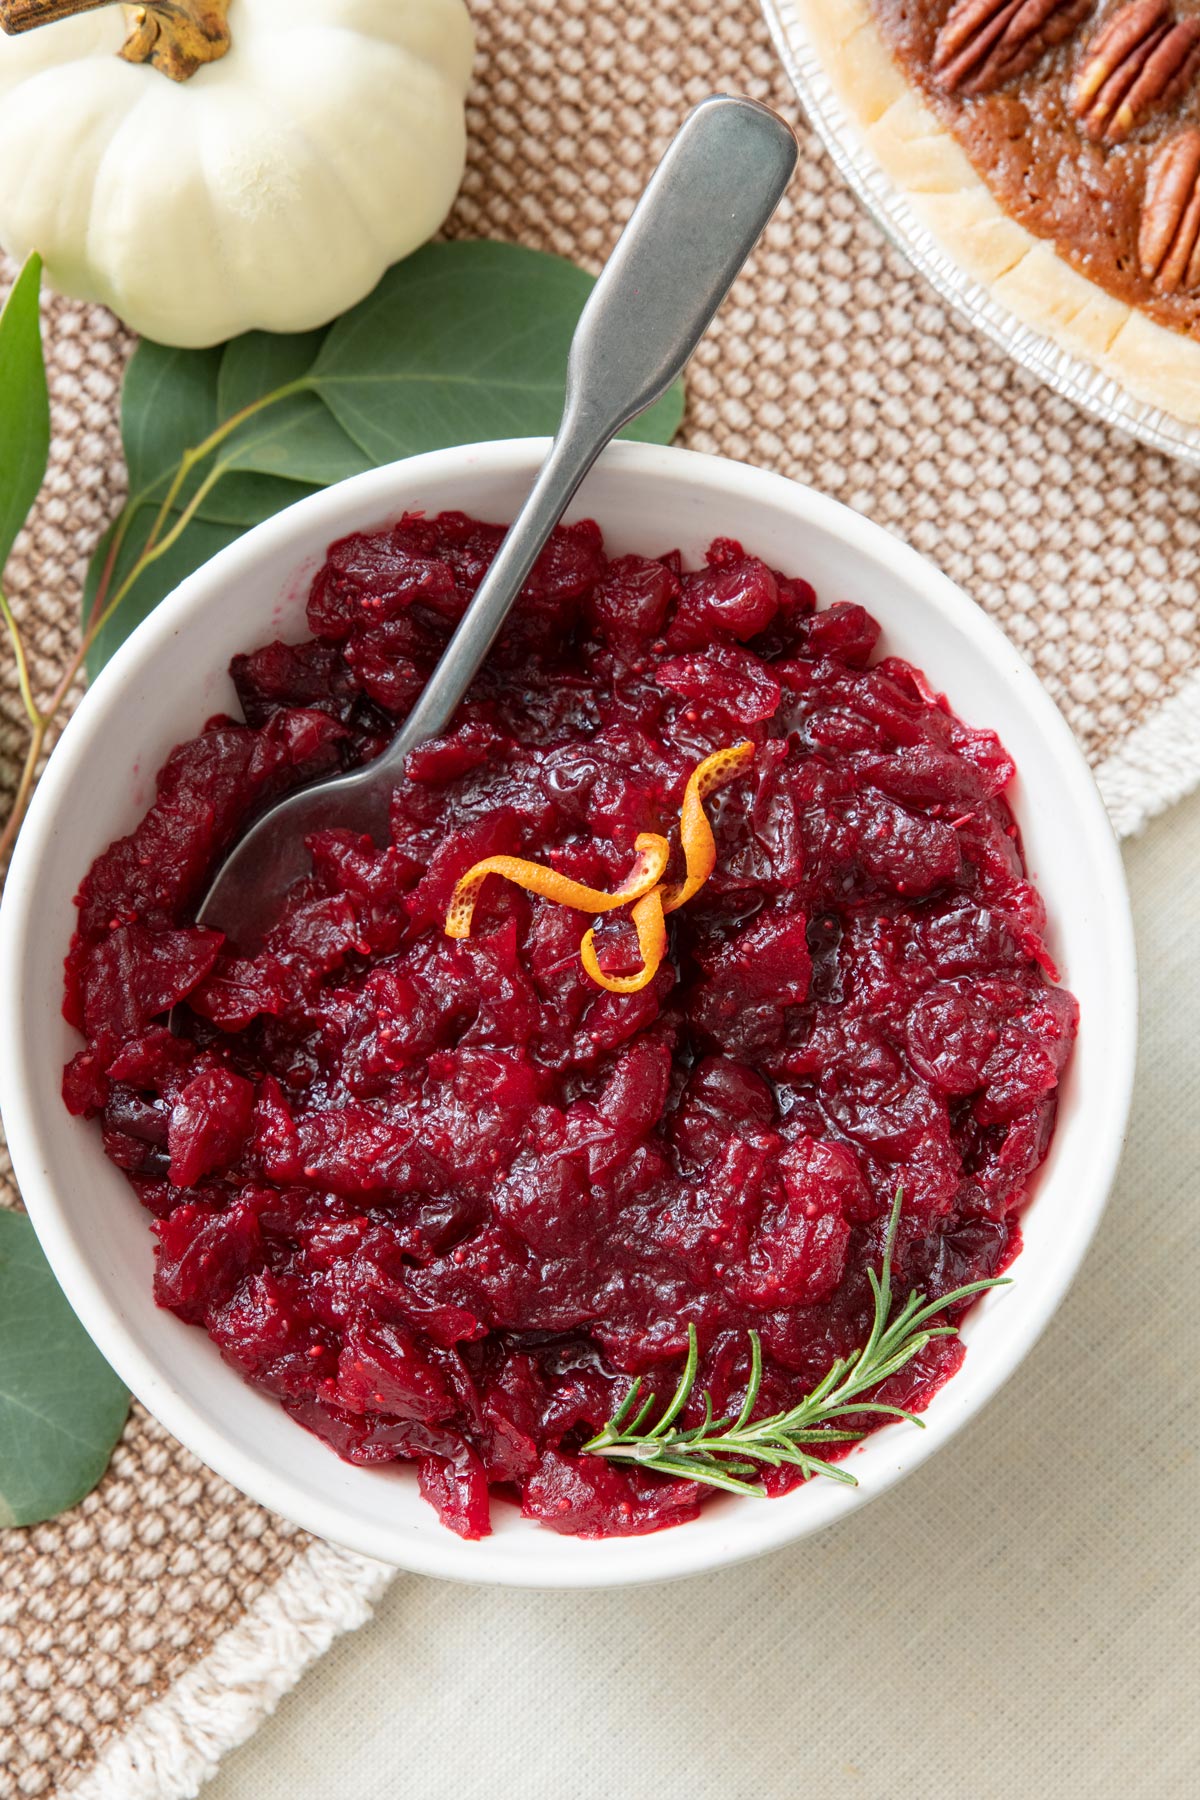 Bowl of cranberry orange sauce garnished with orange zest and fresh sprig of thyme with a spoon dipped in.